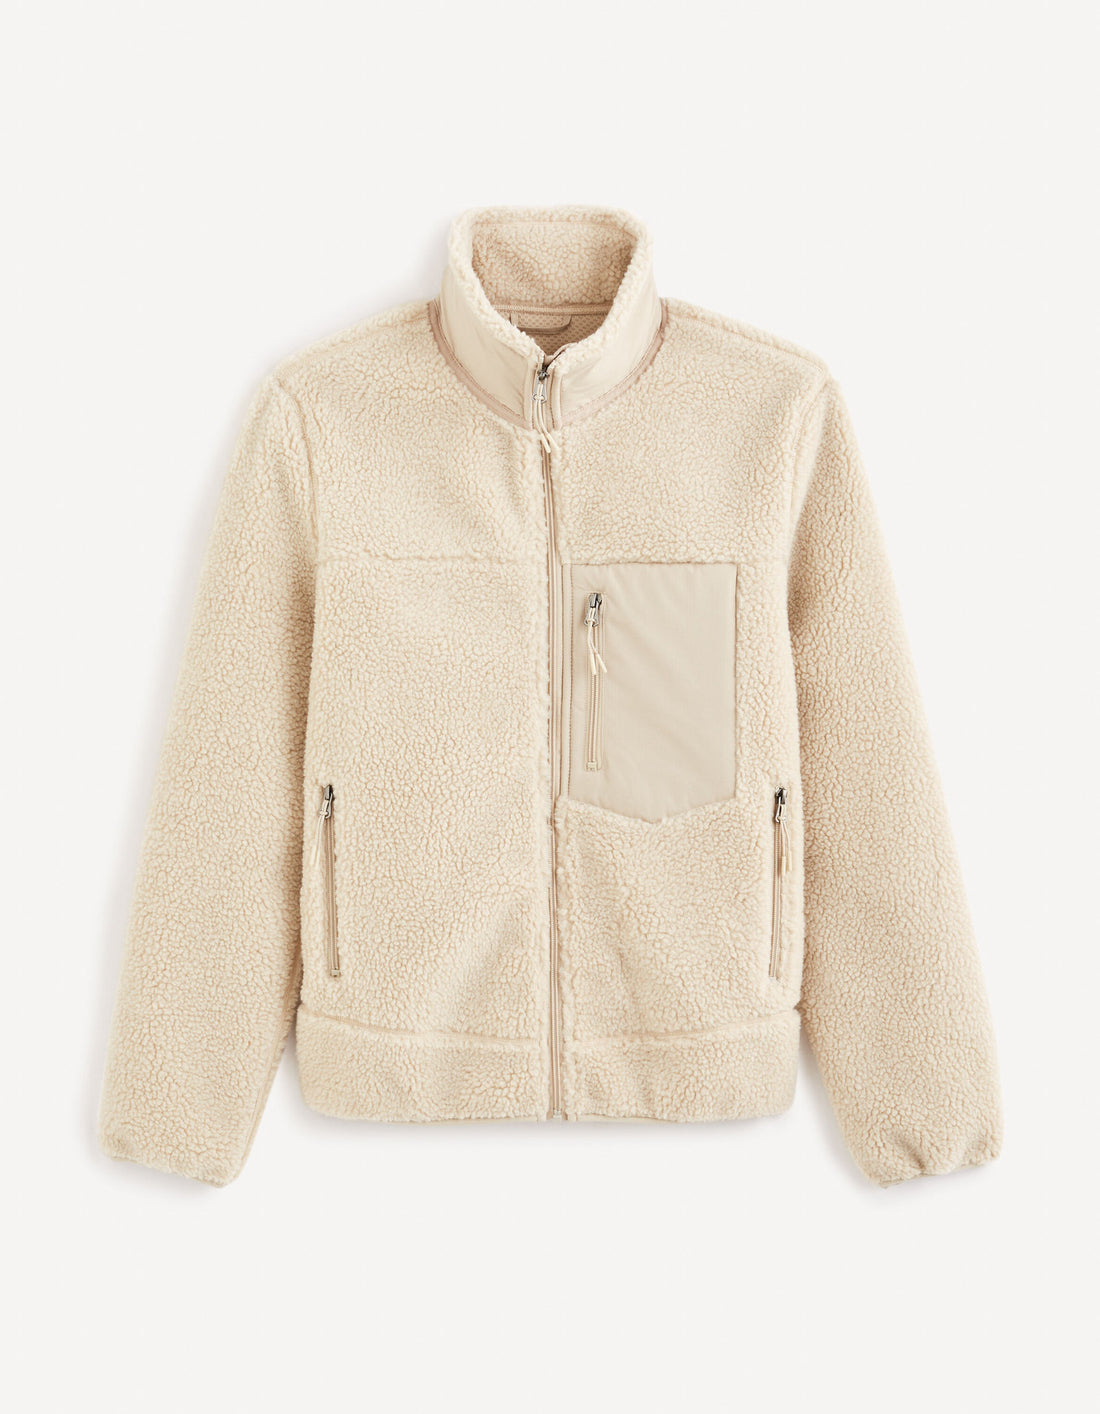 Sherpa Jacket With Stand-Up Collar_FUCURLY_NATURAL_02